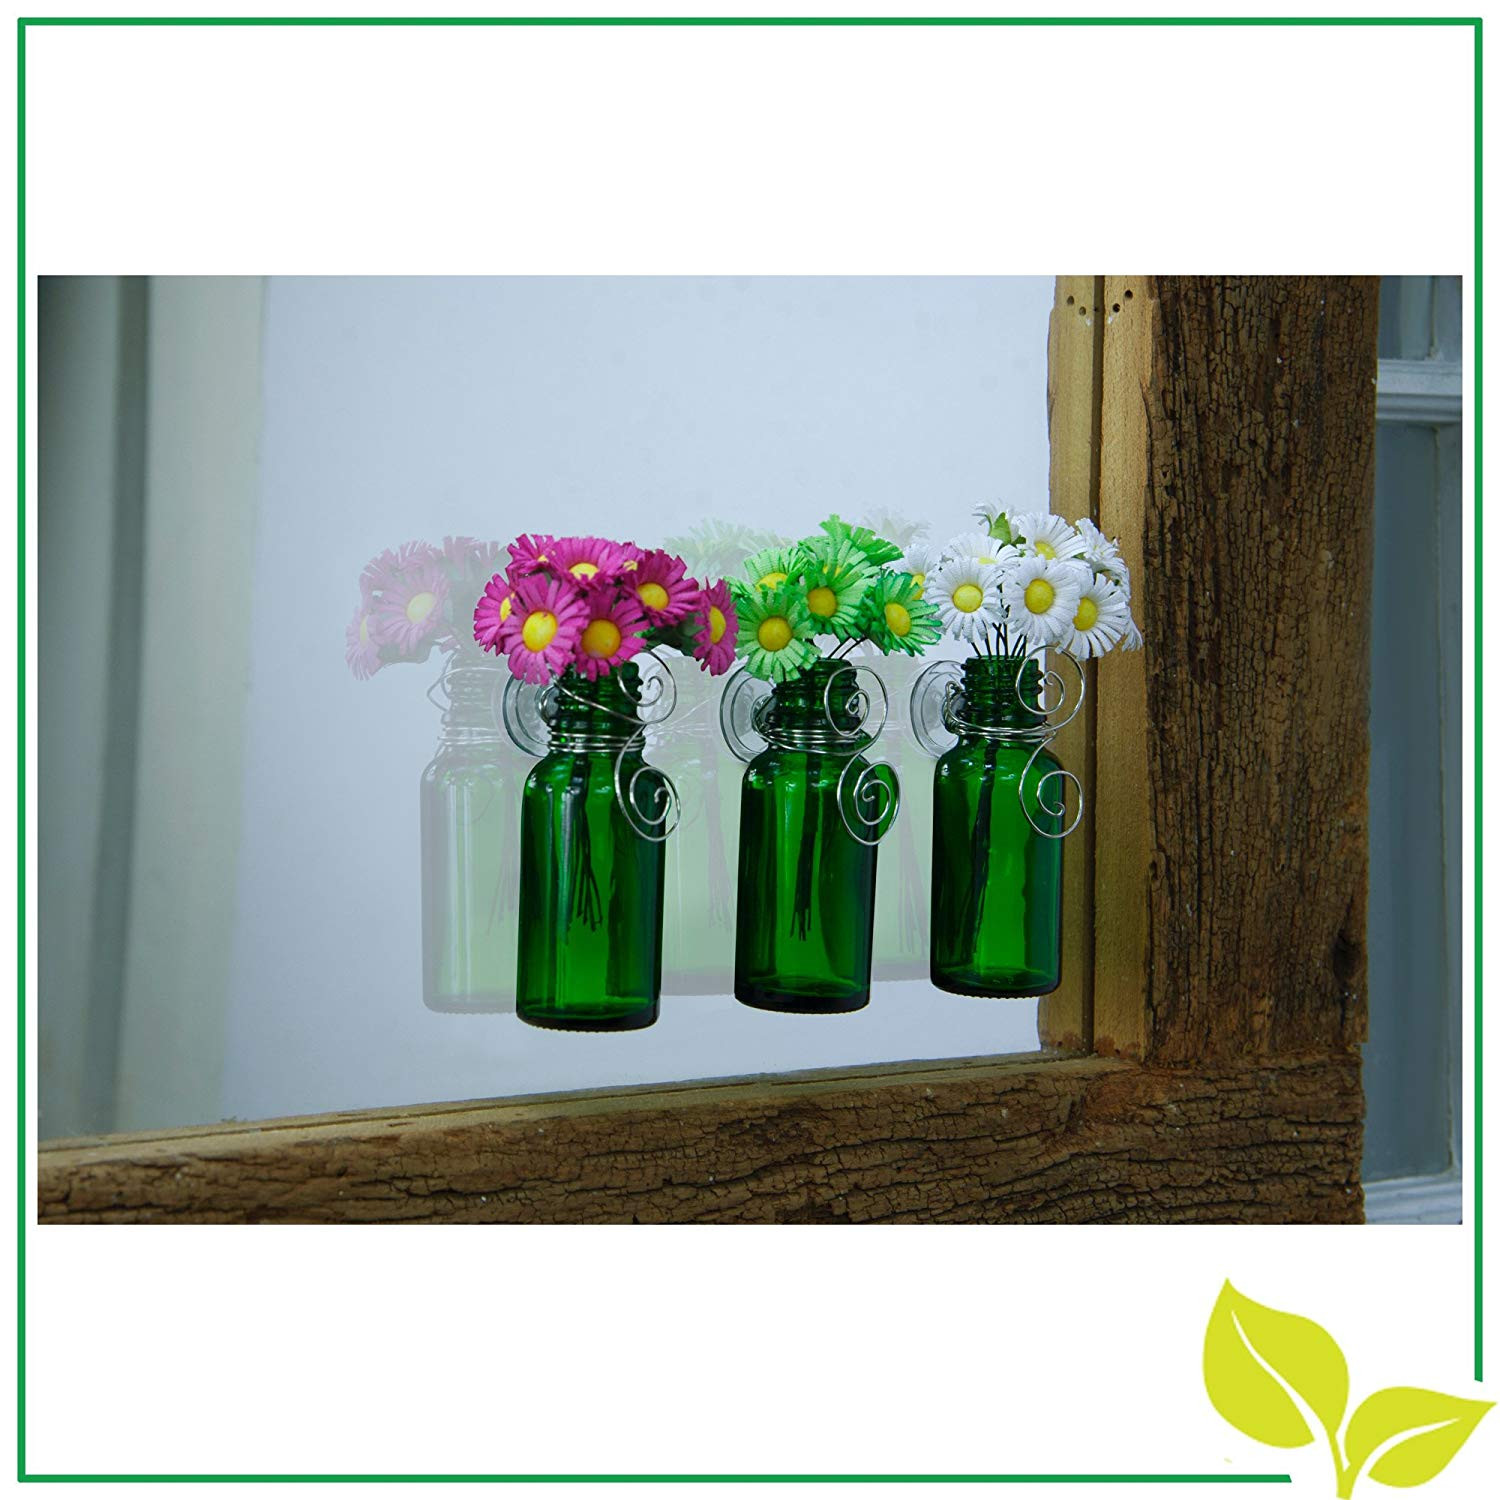 18 Lovable Small Heart Shaped Vase 2024 free download small heart shaped vase of amazon com vazzini mini vase bouquet suction cup bud bottle within amazon com vazzini mini vase bouquet suction cup bud bottle holder with flowers decorative for w